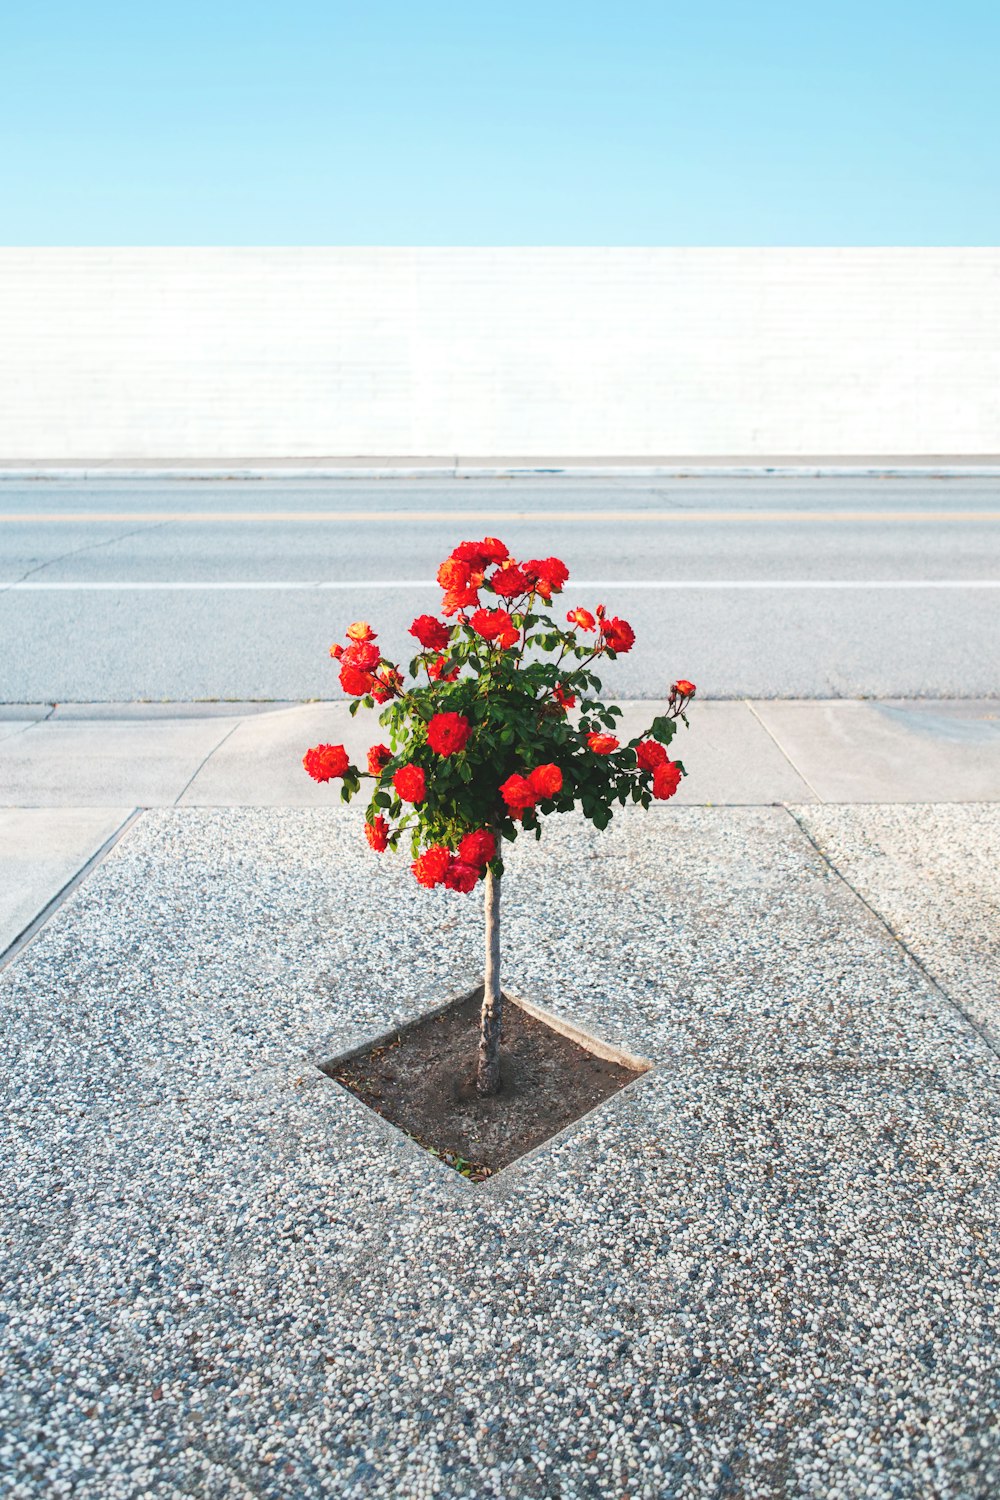 a potted plant with red flowers on a sidewalk